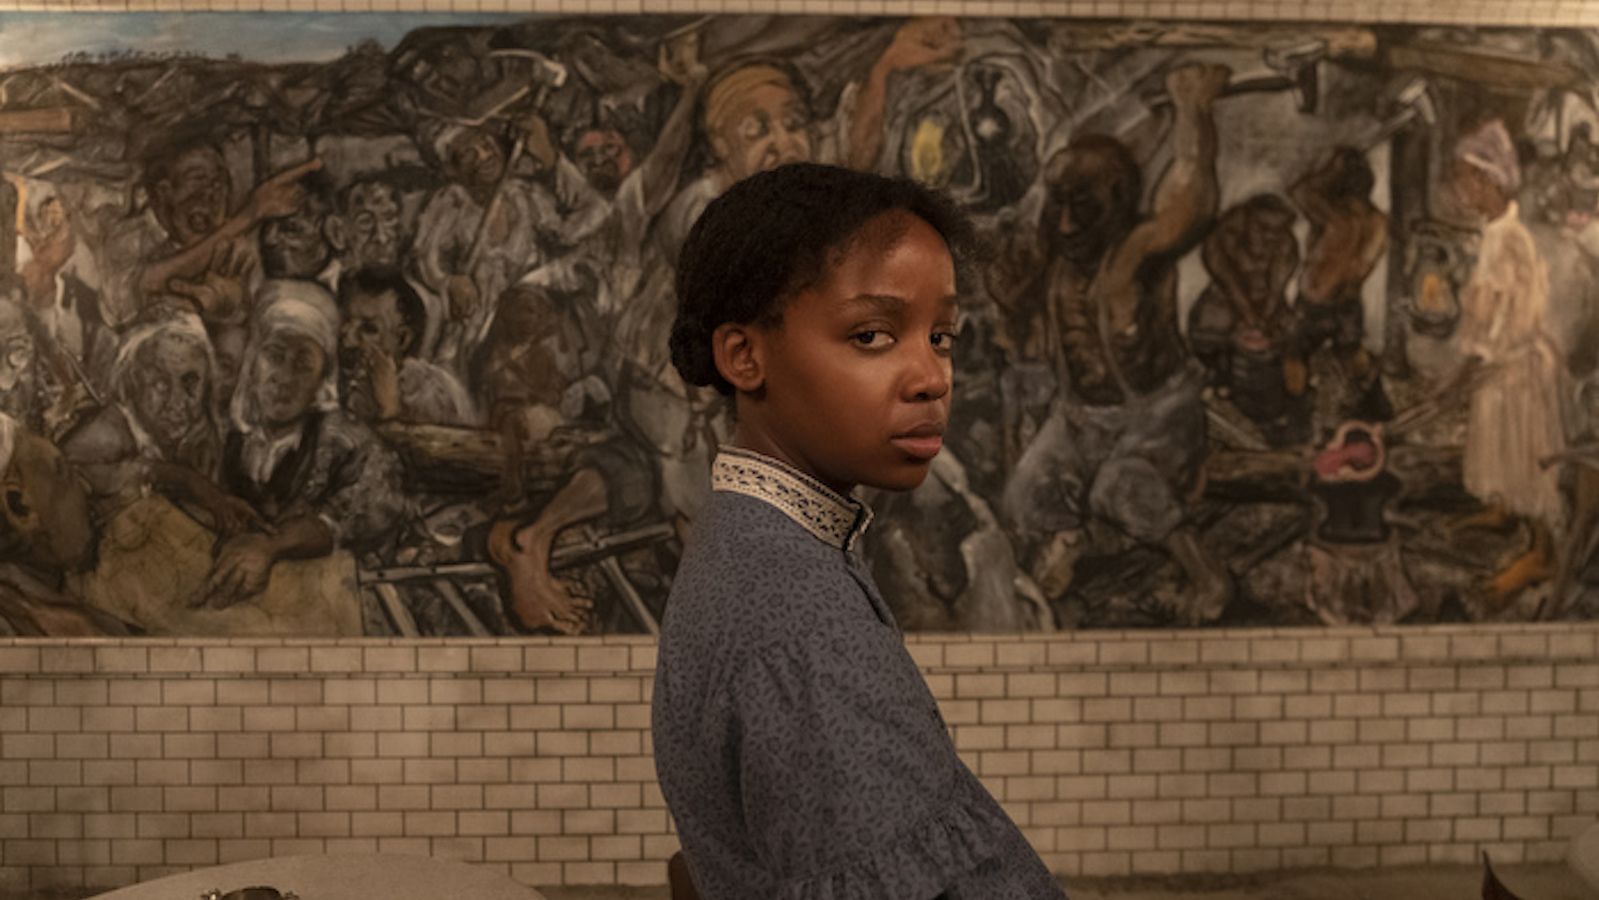 Standing in front of a mural, a young girl in profile turns her gaze on the camera